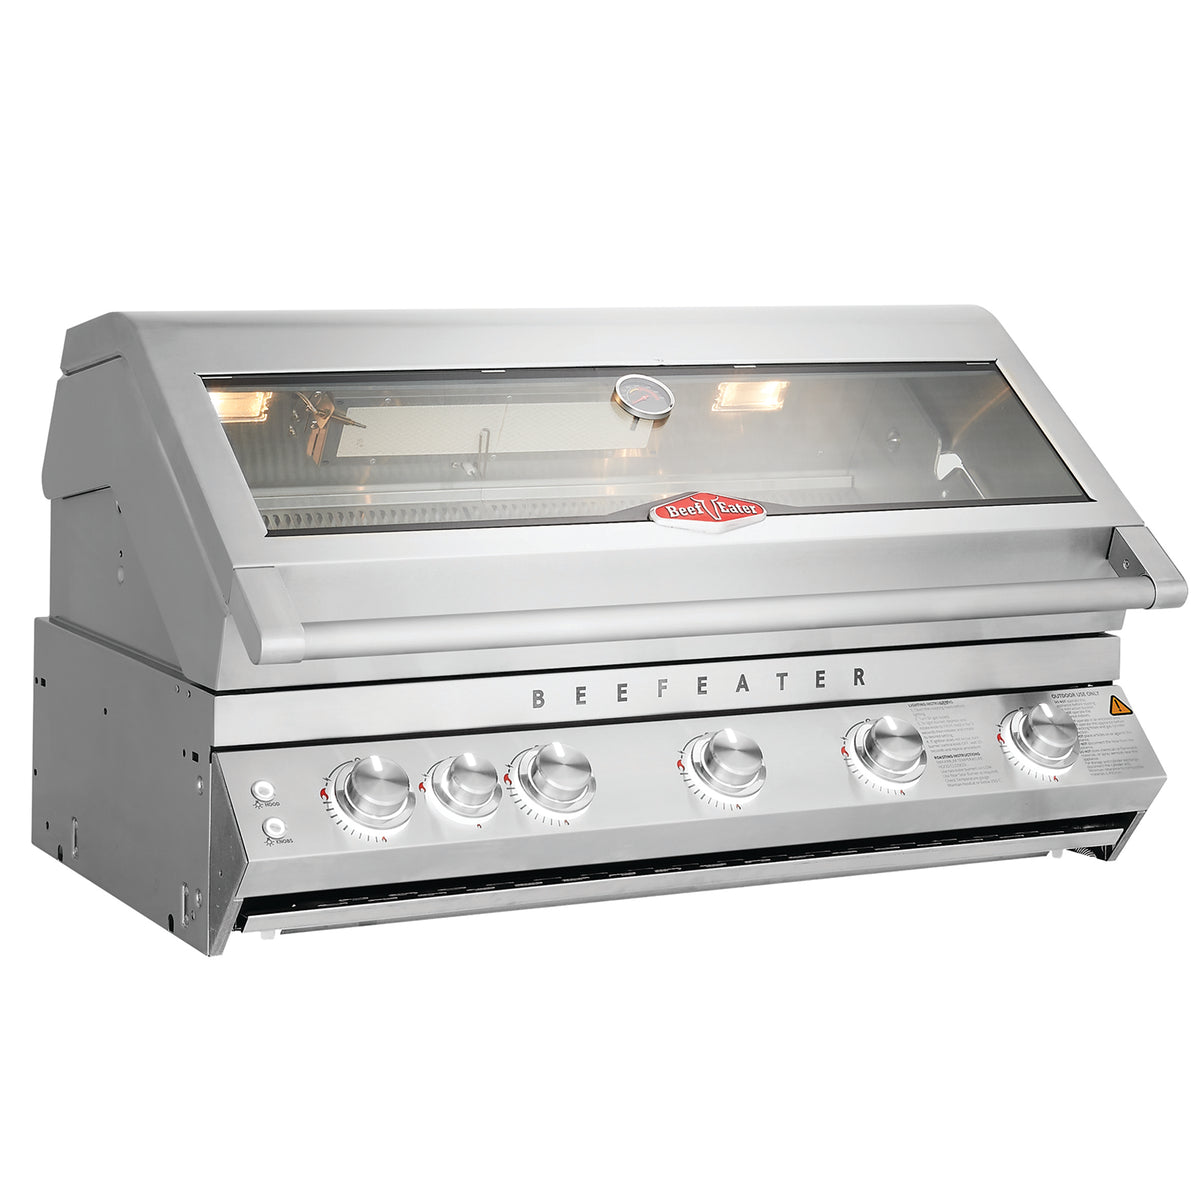 BeefEater 7000 Series Premium 5 Burner Build-In Gas Barbecue